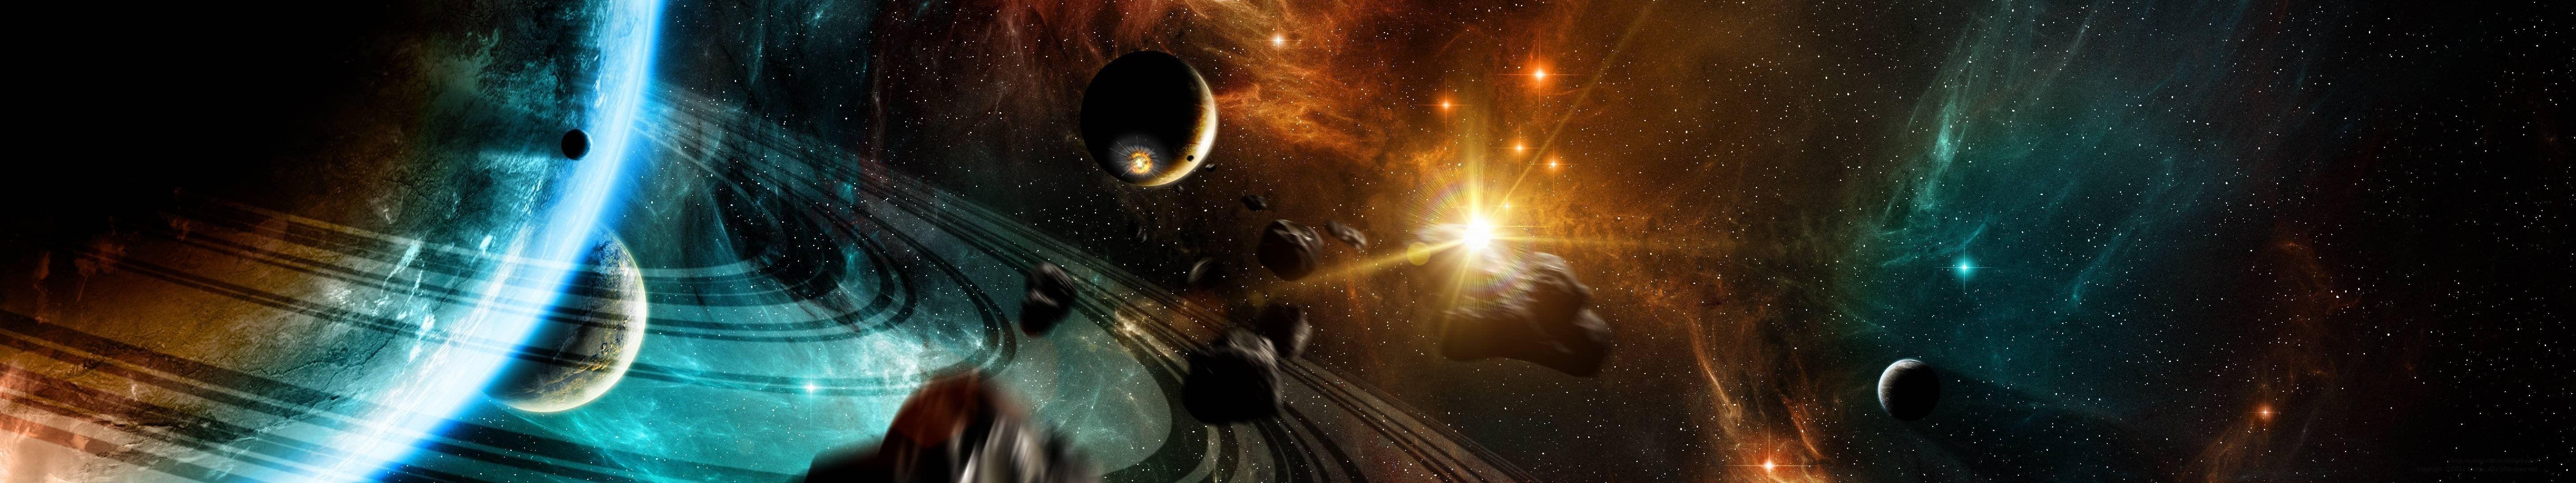 5760 X 2160 Space Wallpapers - Top Free 5760 X 2160 Space Backgrounds